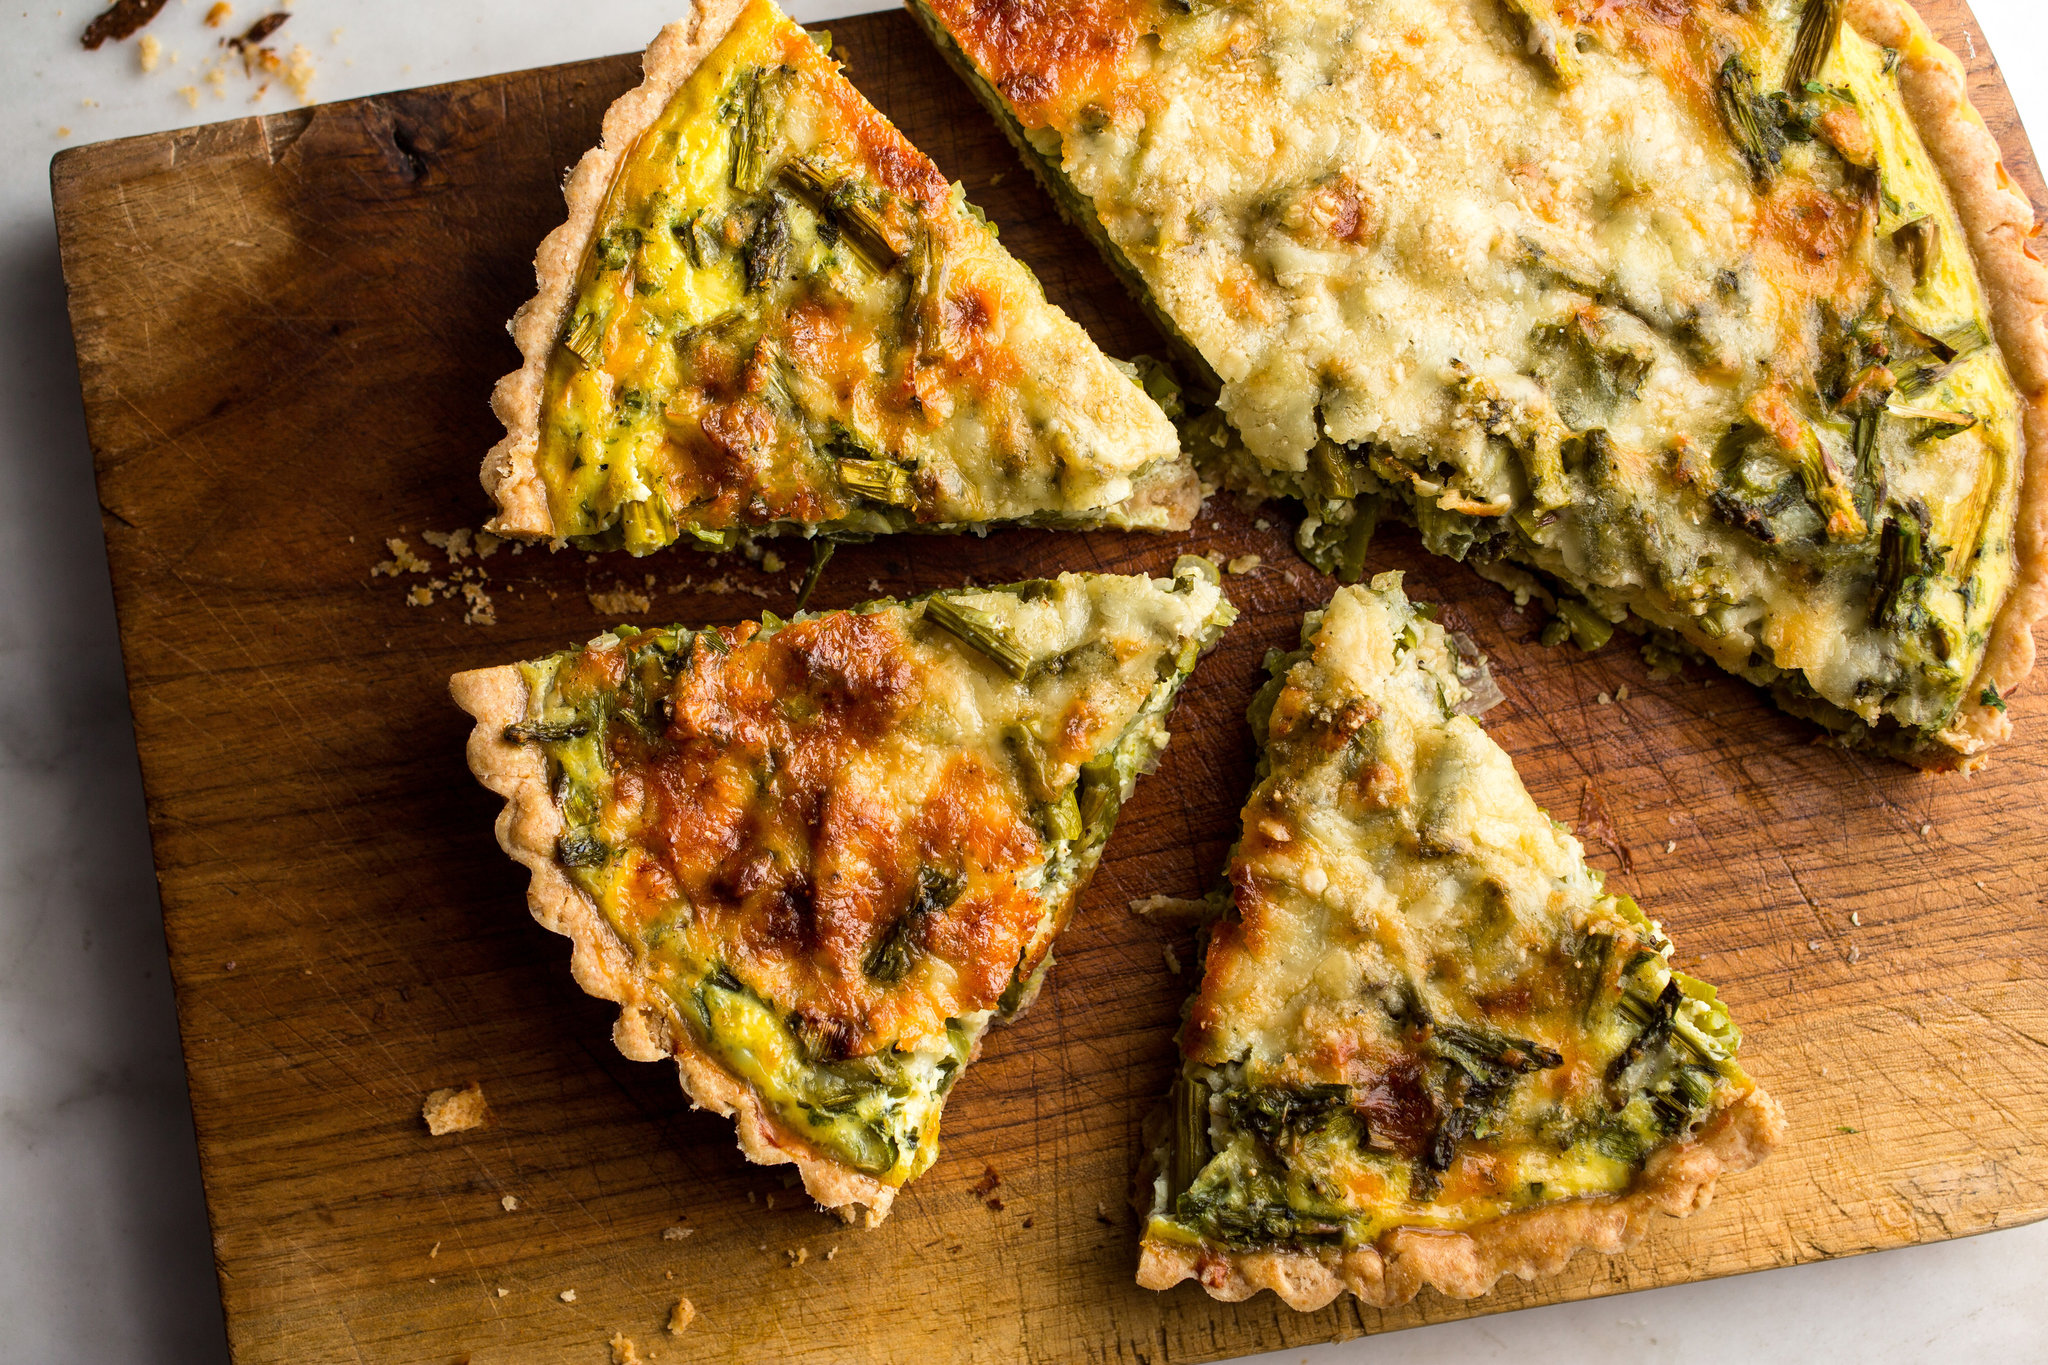 https://www.solfoods.com/wp-content/uploads/2019/02/Whole-Quiche.jpg